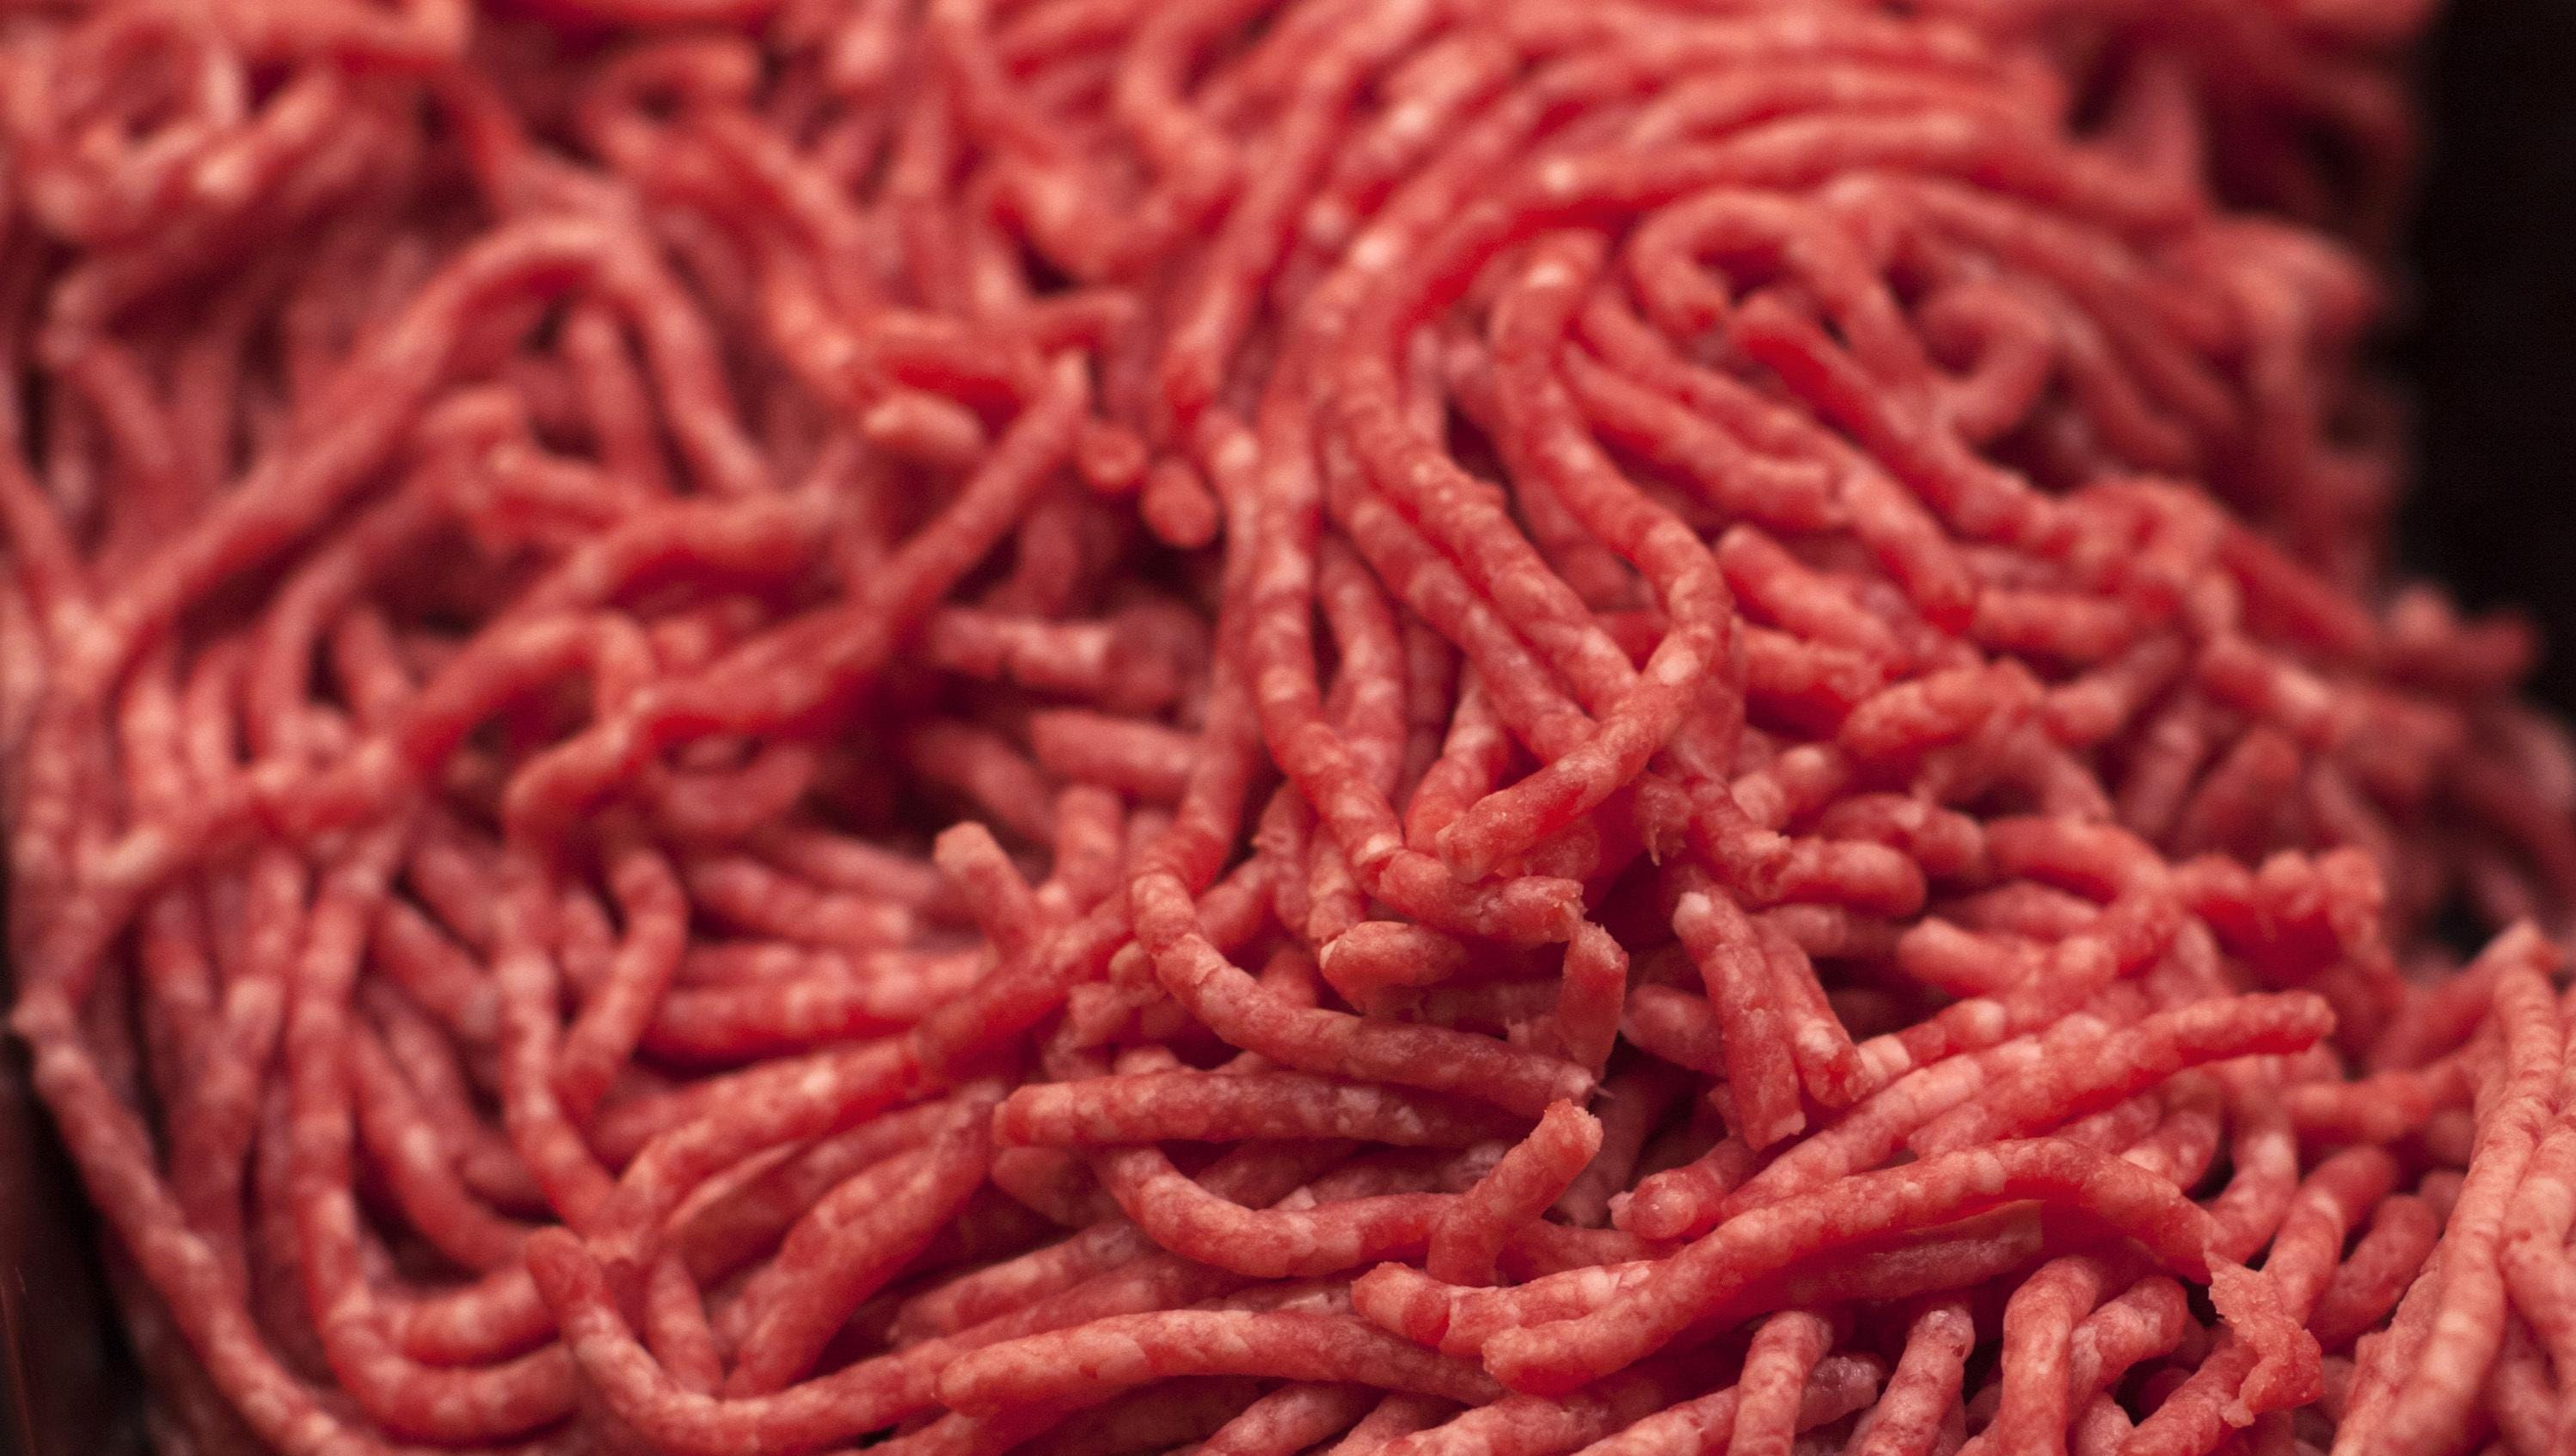 On Friday, April 12, 2019, the Centers for Disease Control and Prevention said ground beef is the likely source of an E. coli outbreak that has sickened more than 100 people in six states.